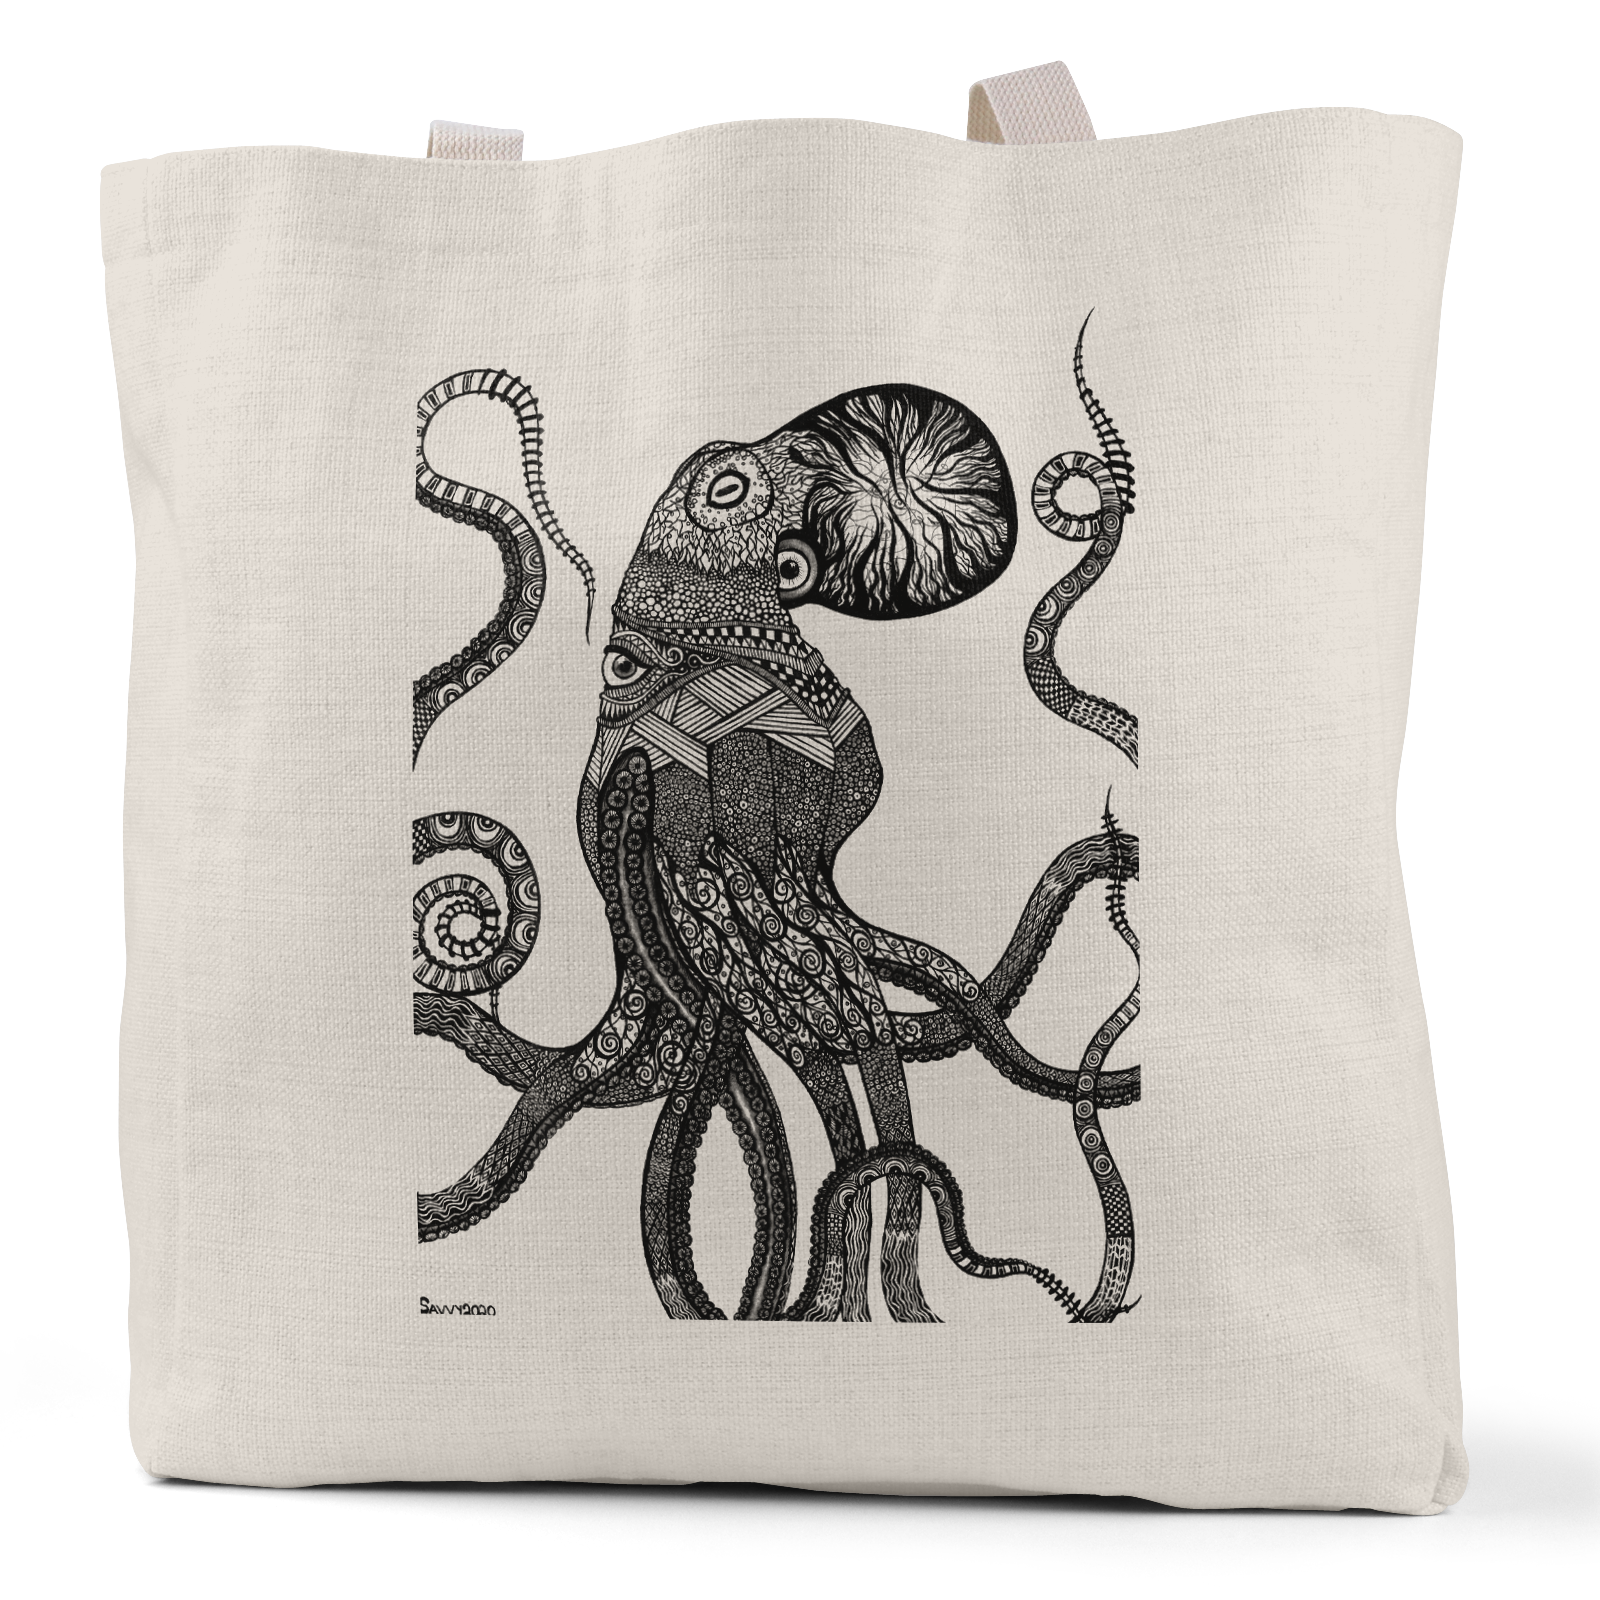 "Ocular Octopus" (Black/White Version) - Small/Large Linen Tote